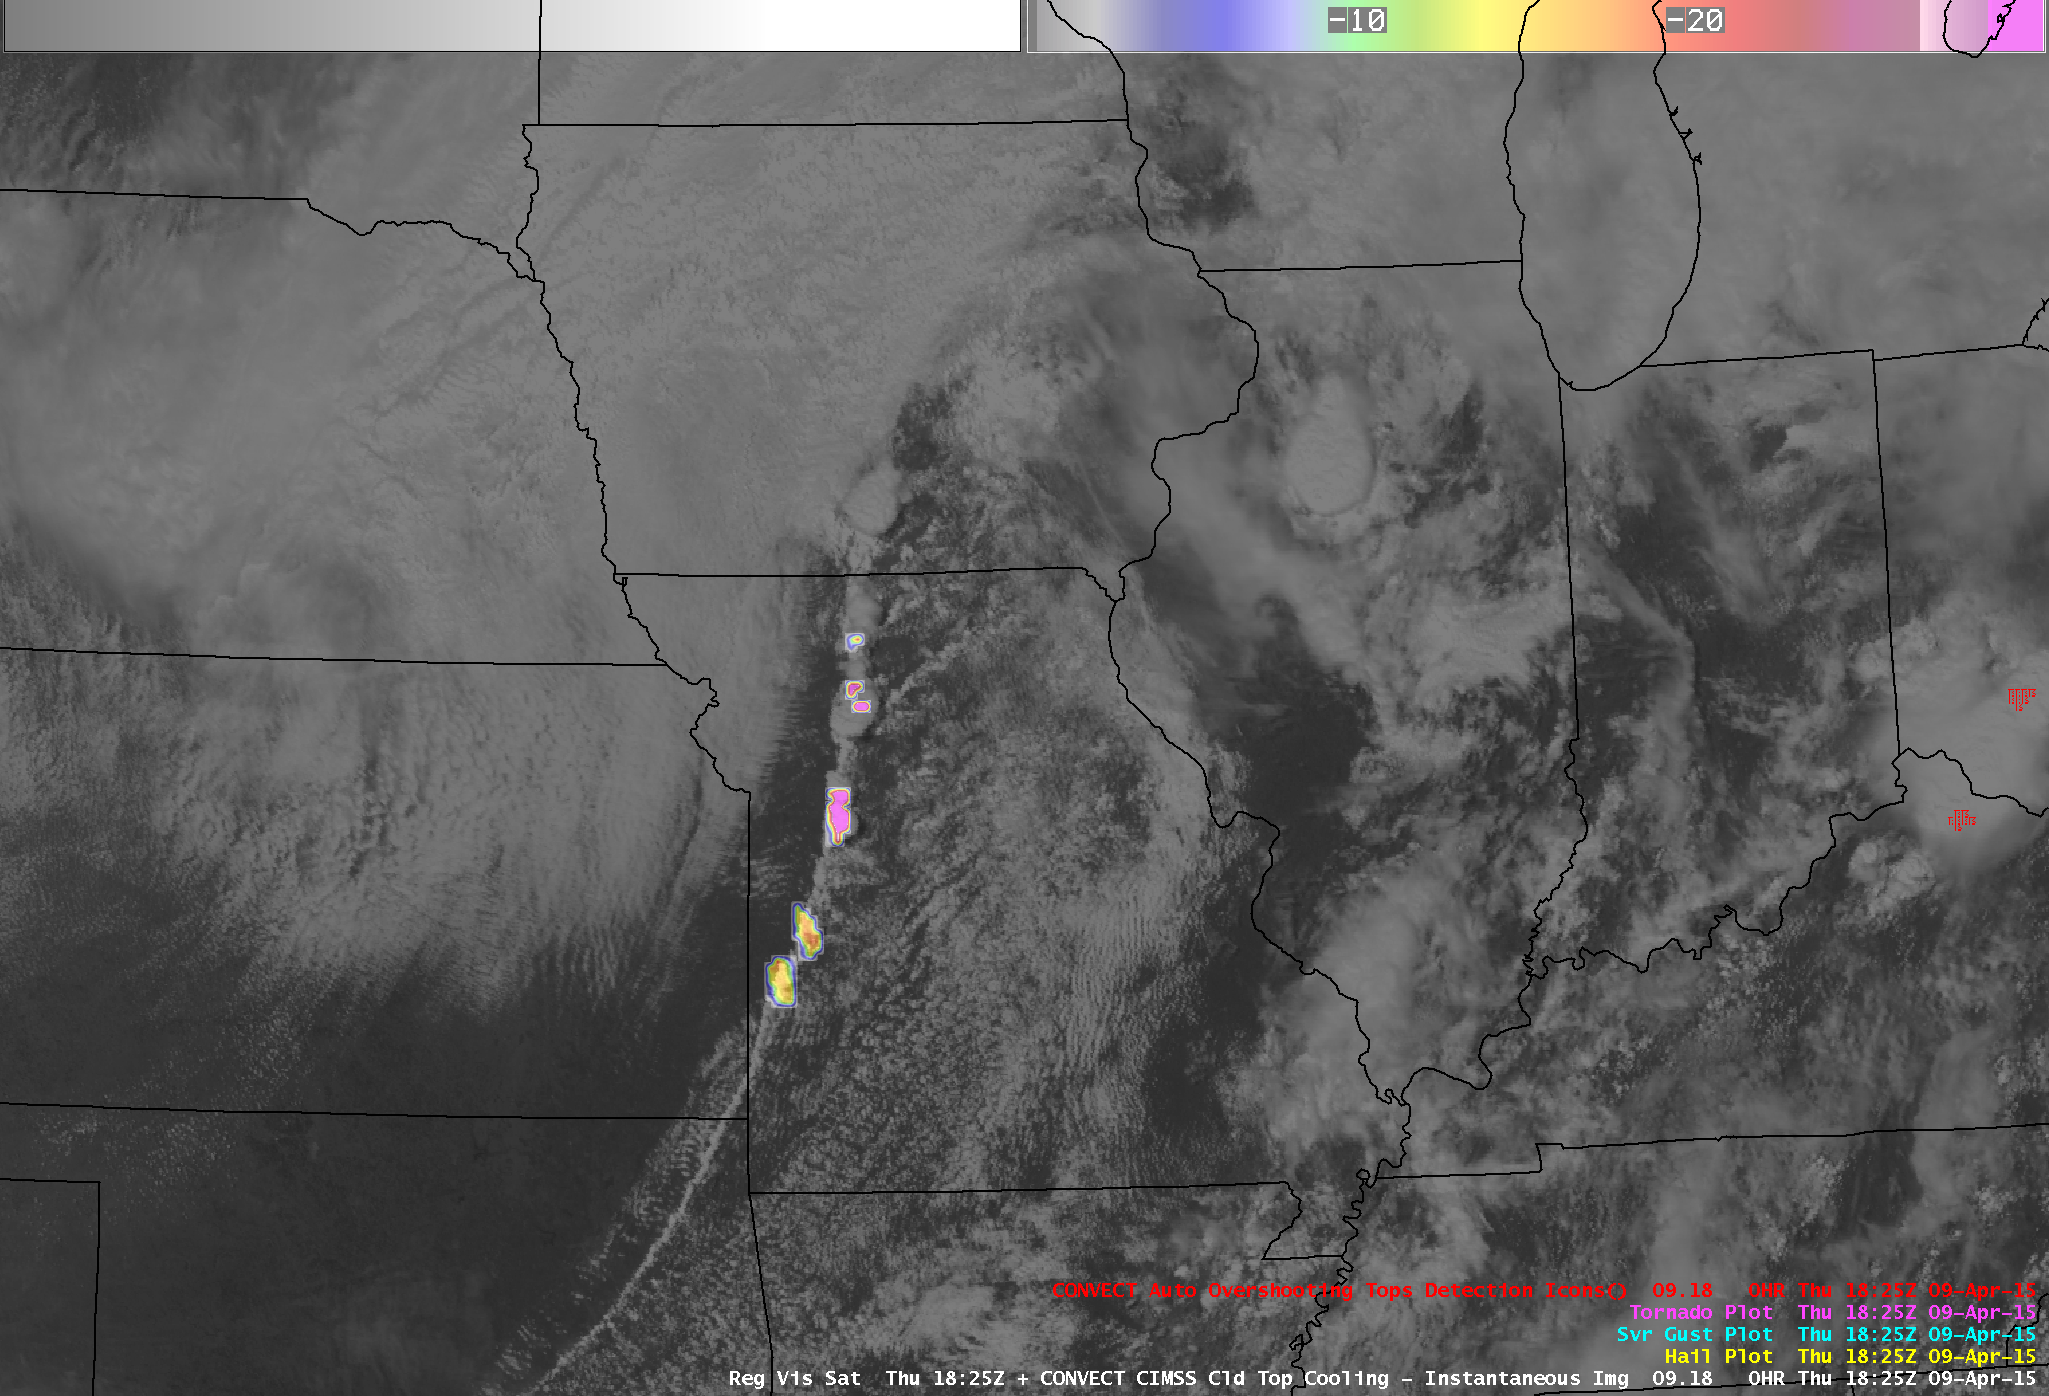 GOES-13 0.63 µm visible images, with Cloud-Top Cooling Rate, Overshooting Tops Detection, and SPC storm reports (click to play animation)